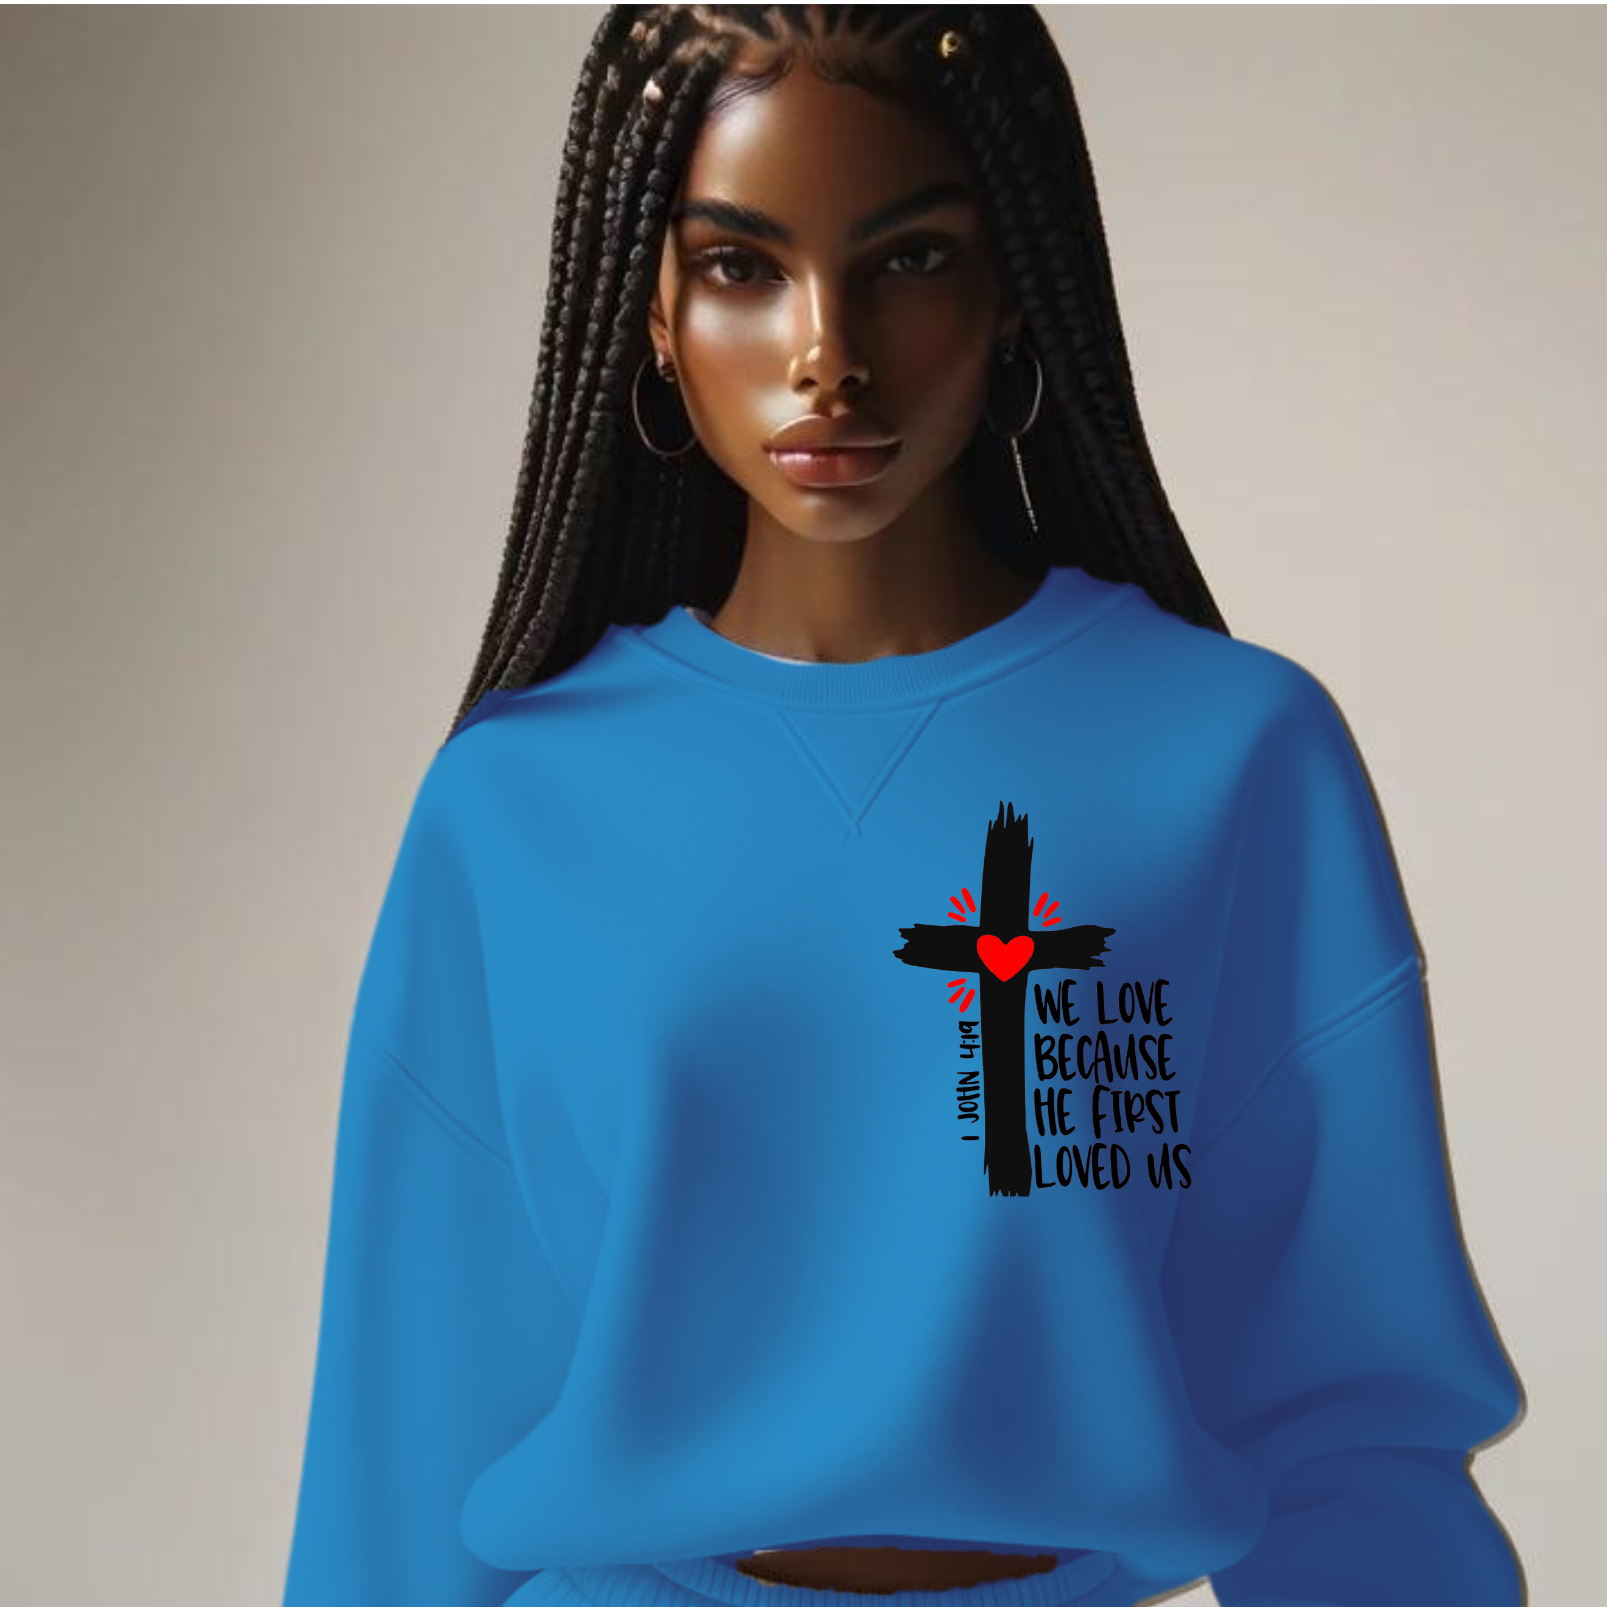 African American Woman with Blue sweat suit . Black Cross with the words We Love because he first Loved 